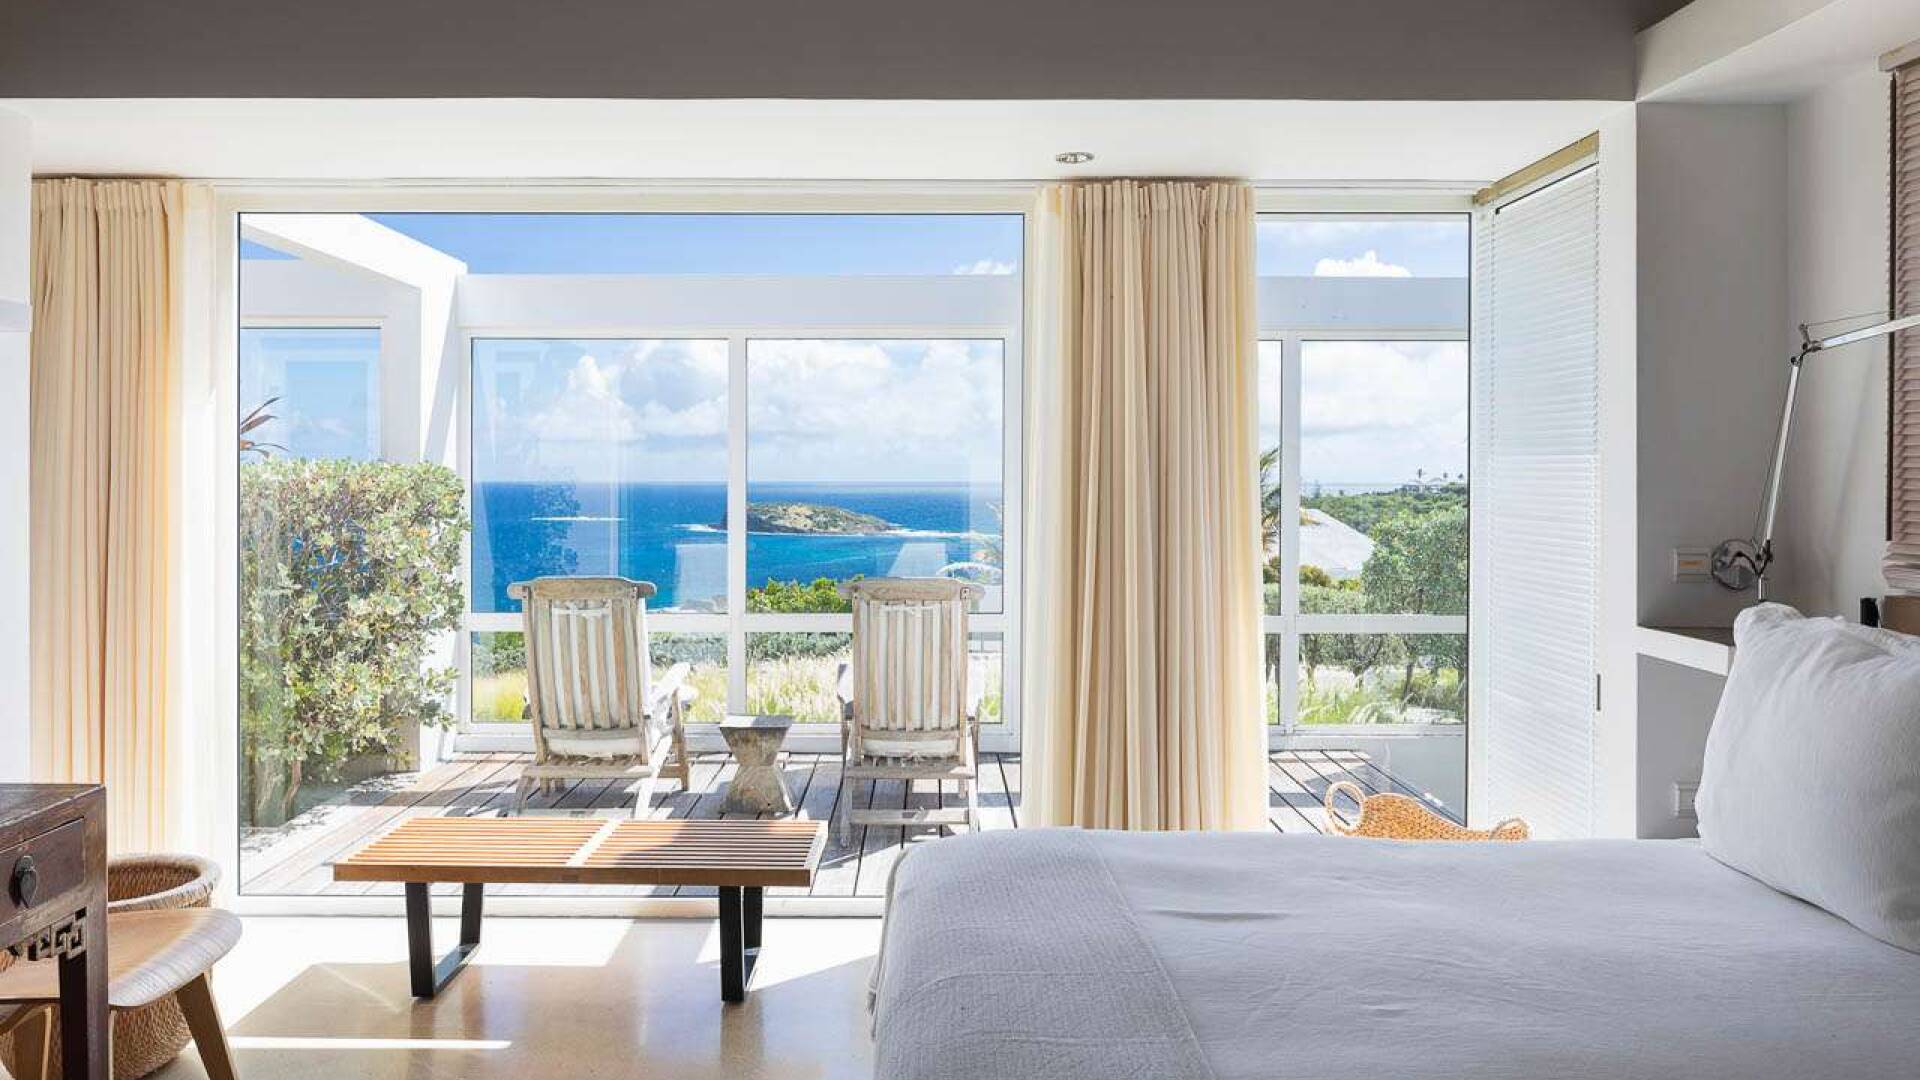 Bedroom at WV SEA, Pointe Milou, St. Barthelemy